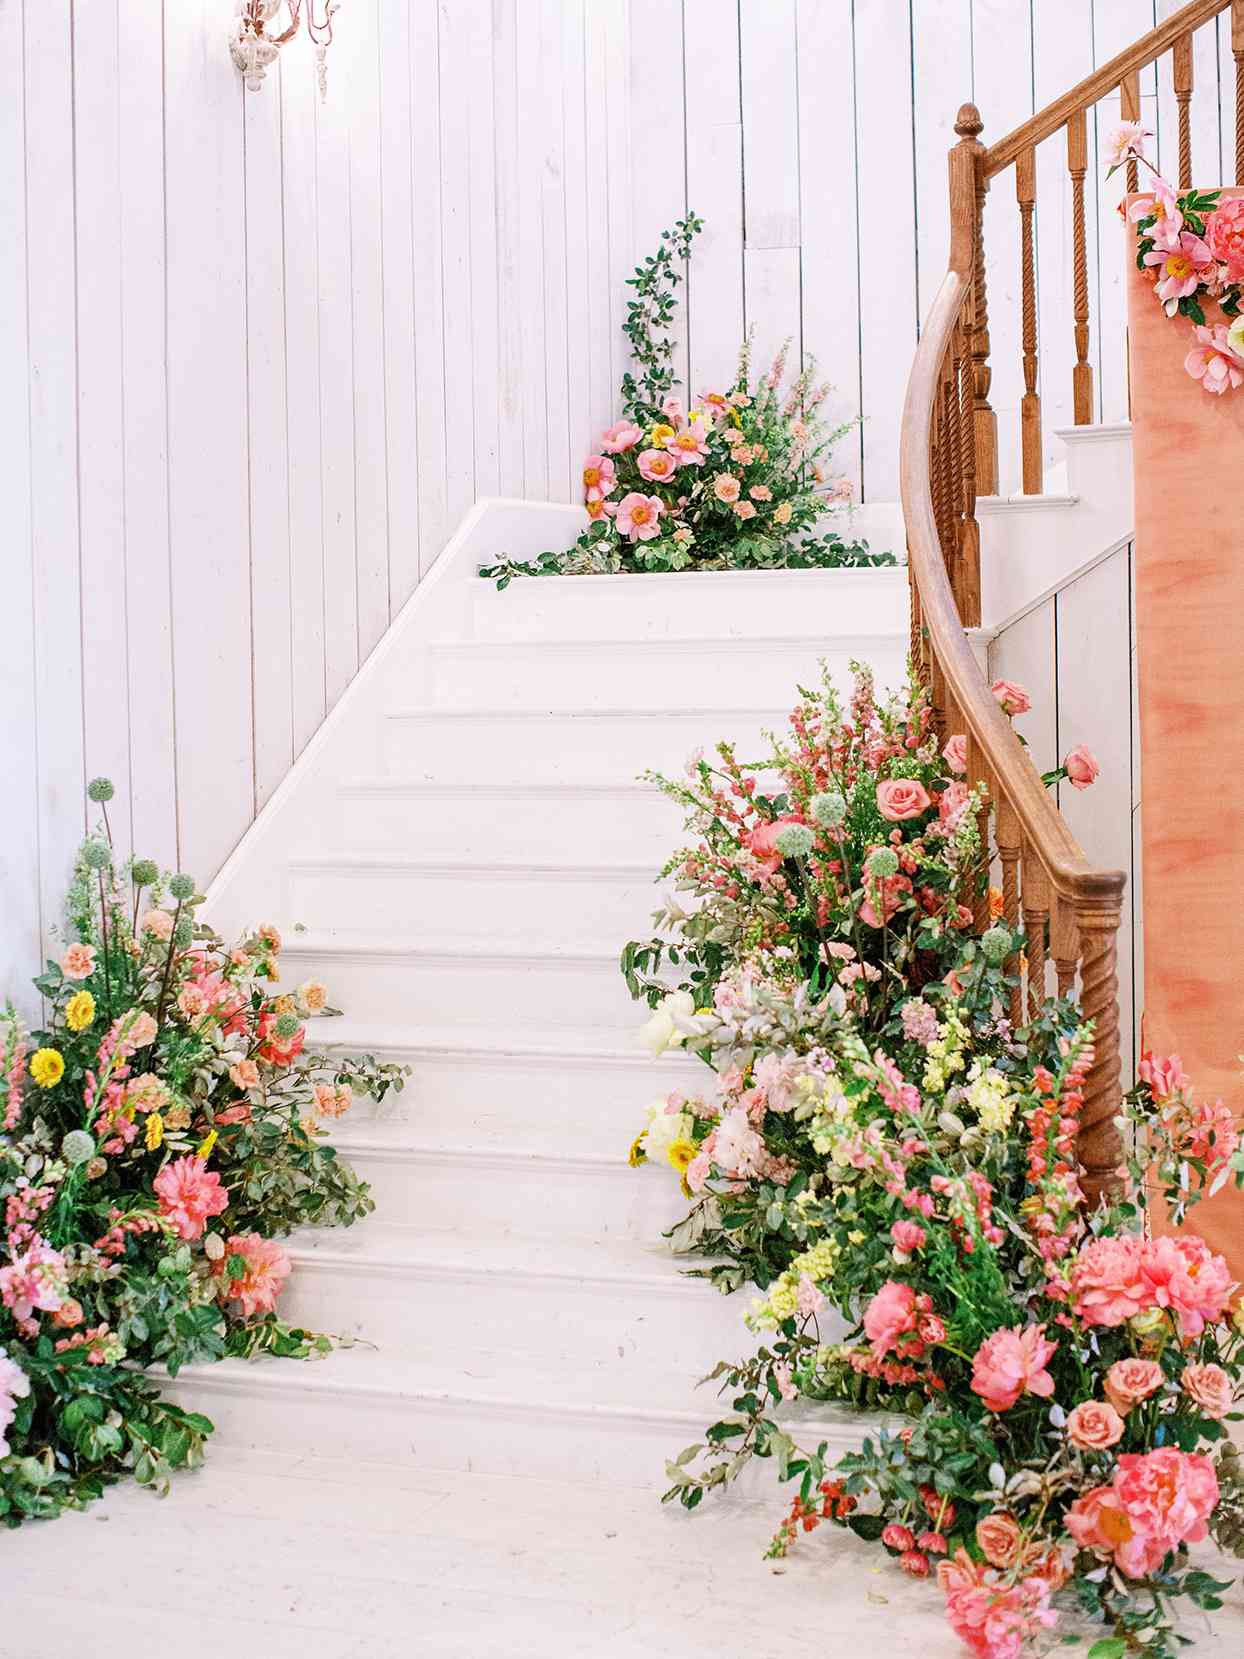 evie joe wedding reception white staircase with citrus colored florals